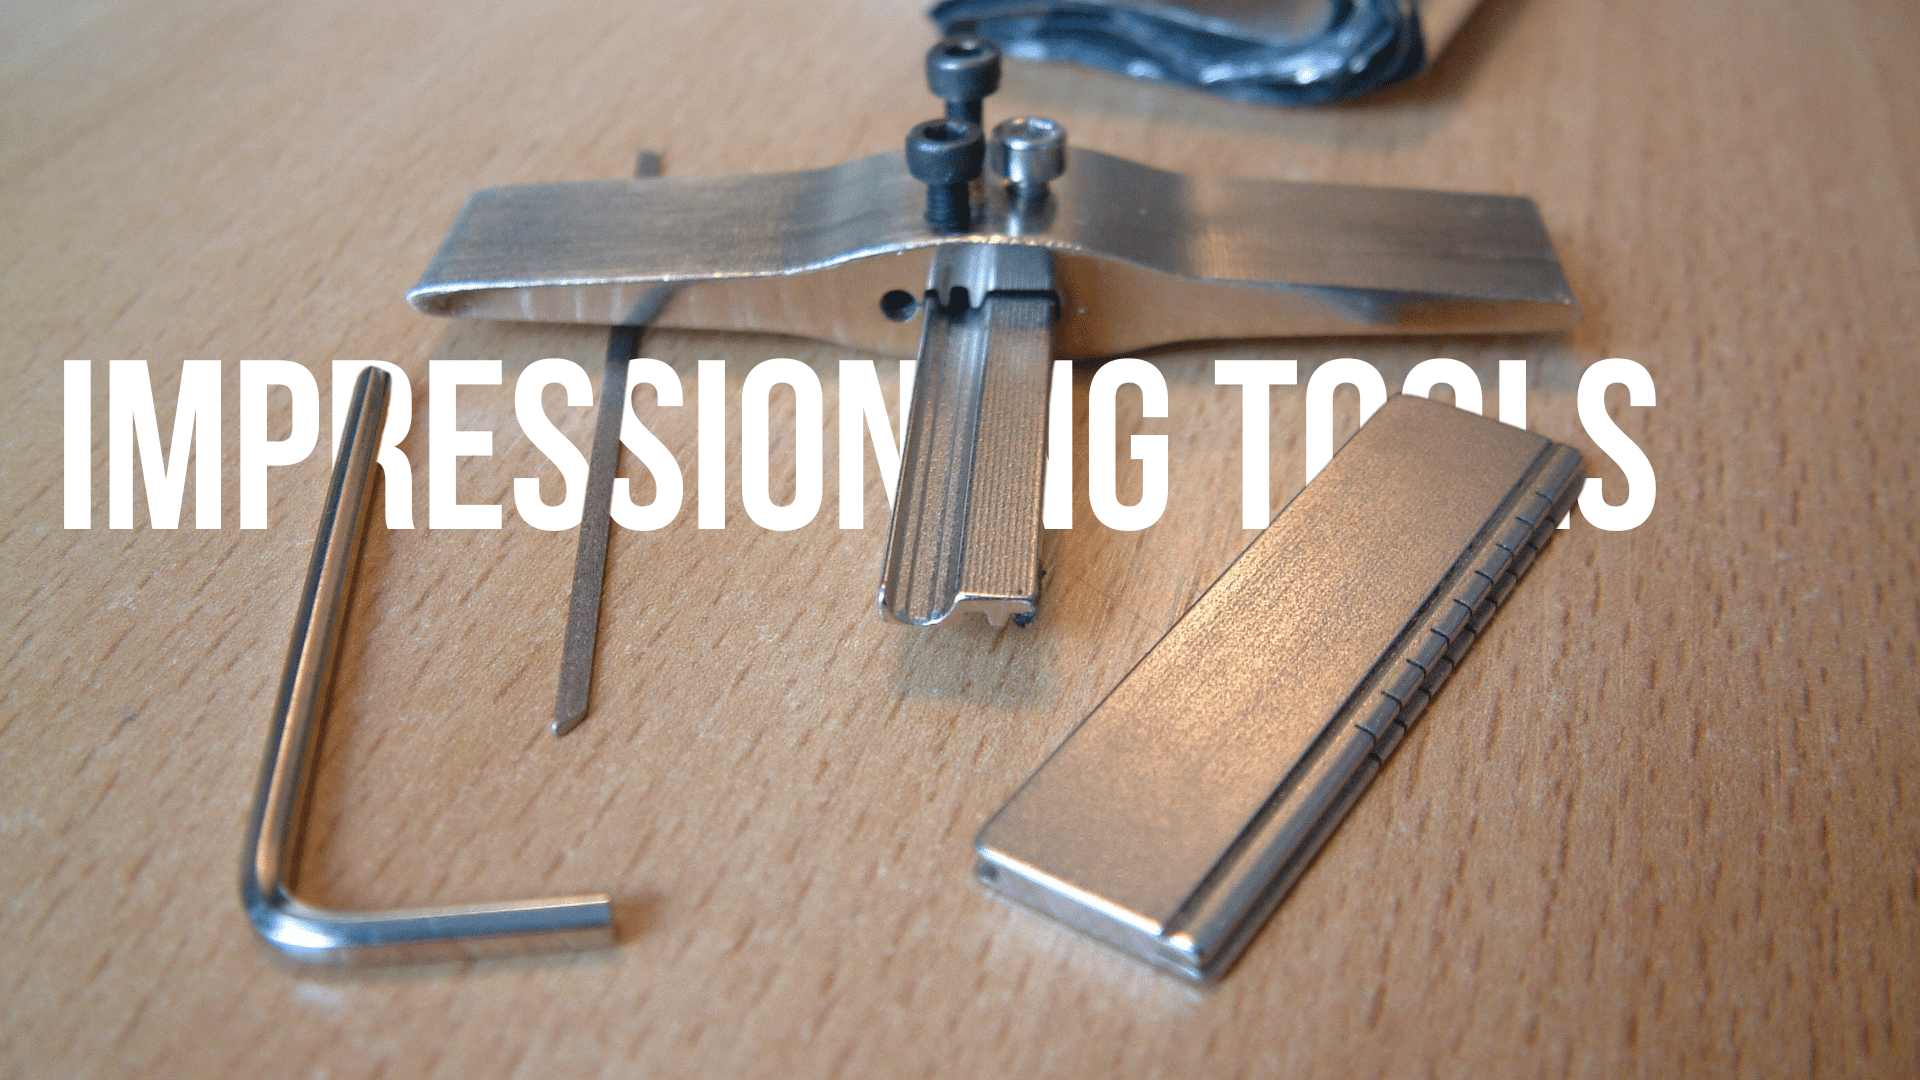 What is Impressioning Tools